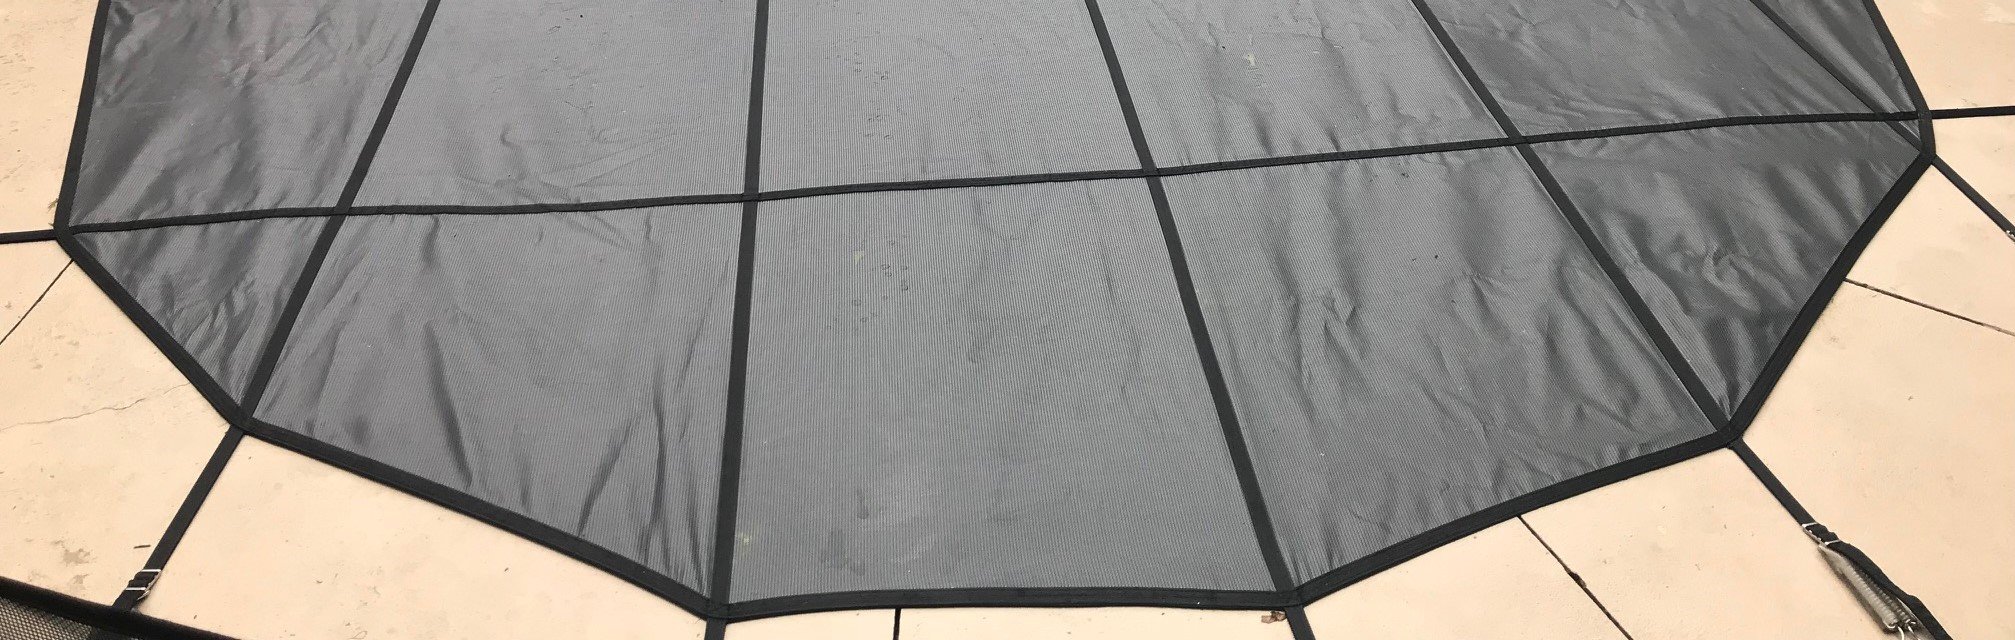 Whats the difference in swimming pool safety covers-2